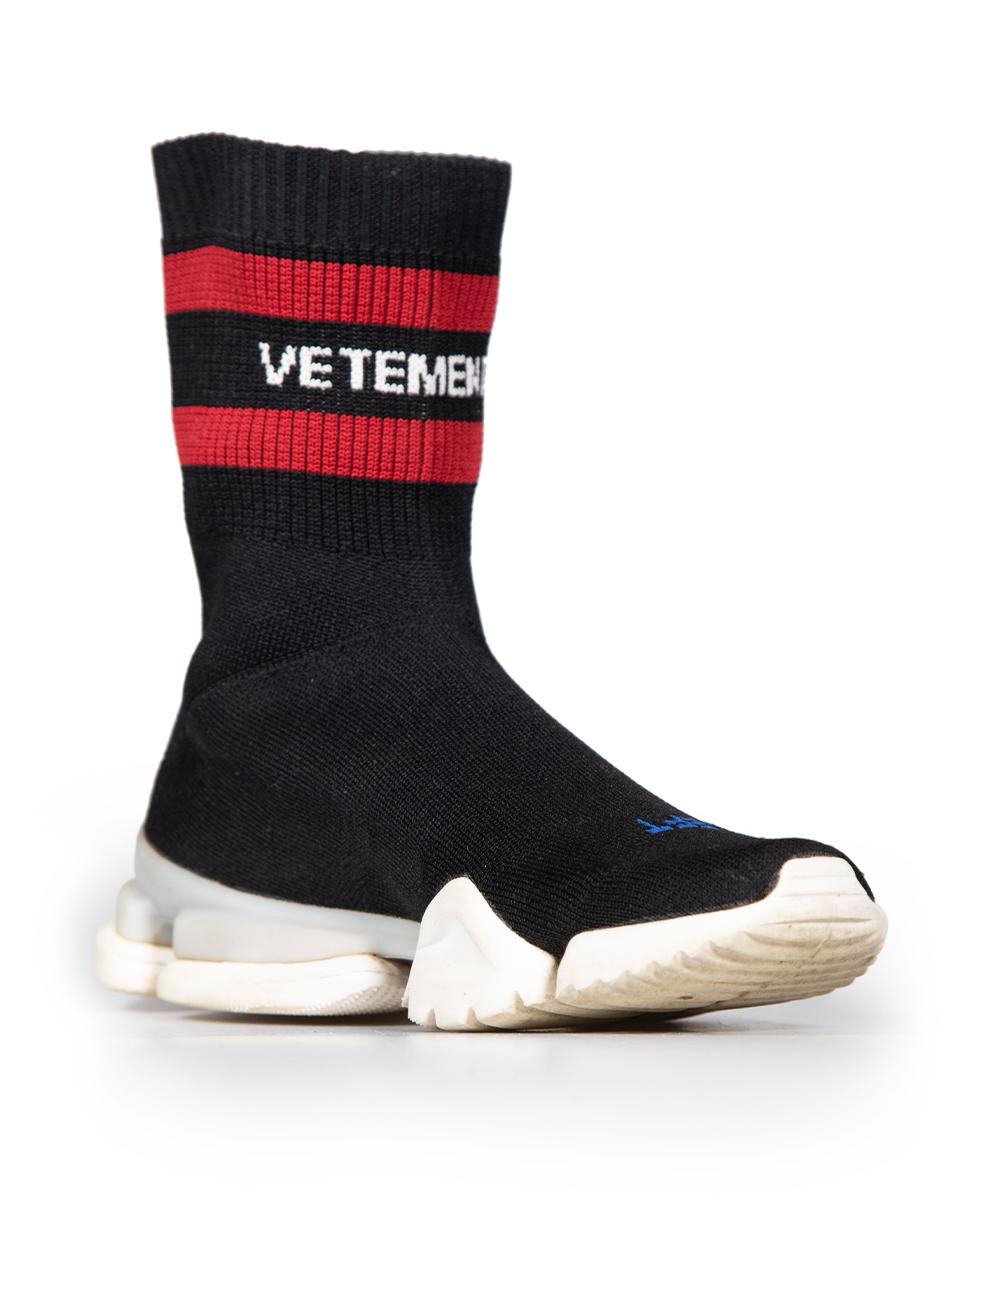 CONDITION is Good. General wear to trainers is evident. Moderate signs of wear to the soles on this used Vetements designer resale item.
 
 
 
 Details
 
 
 Vetements x Reebok
 
 Black
 
 Cloth textile
 
 Sock trainers
 
 High top
 
 Chunky sole
 
